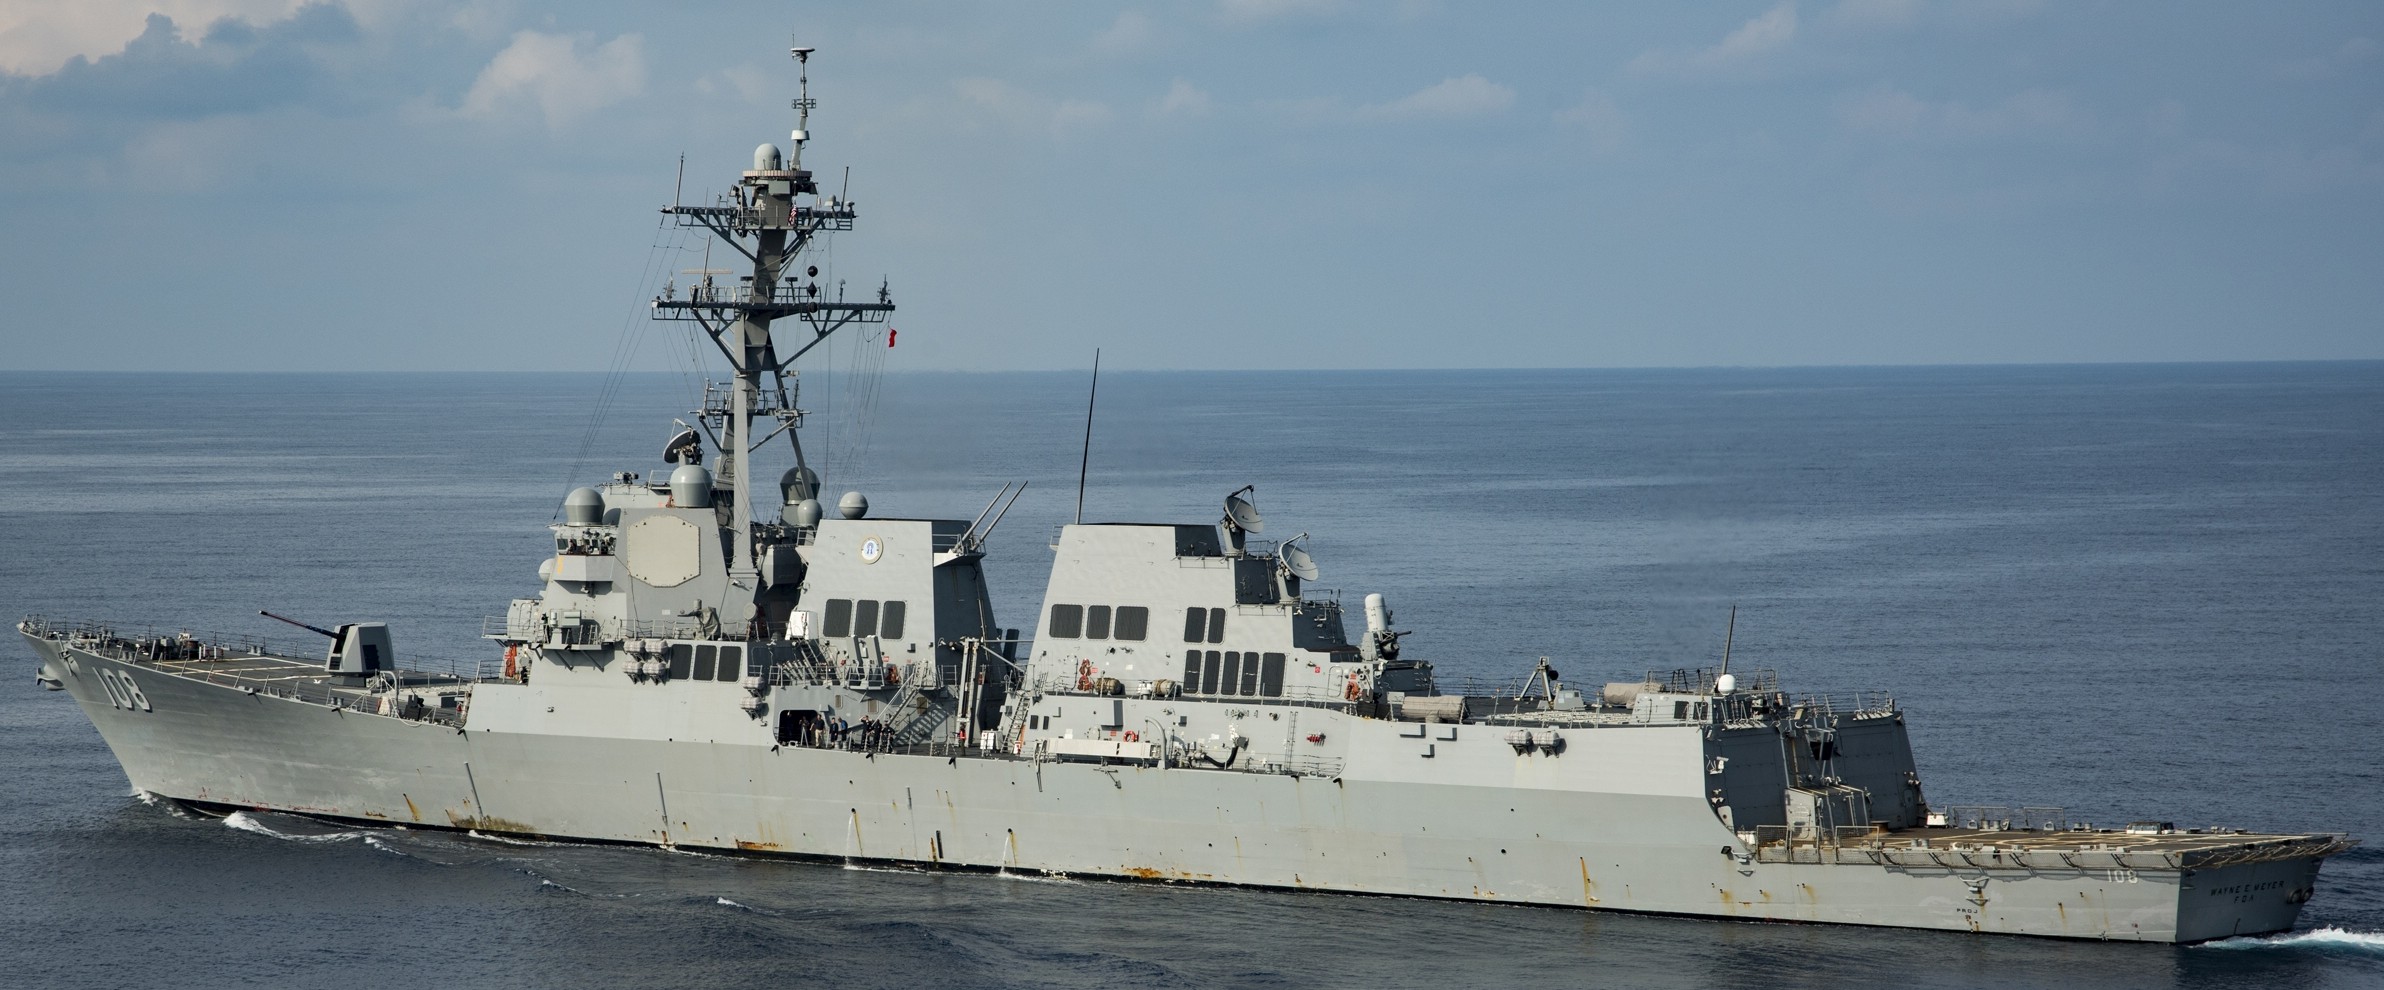 ddg-108 uss wayne e. meyer arleigh burke class guided missile destroyer aegis us navy south china sea 34